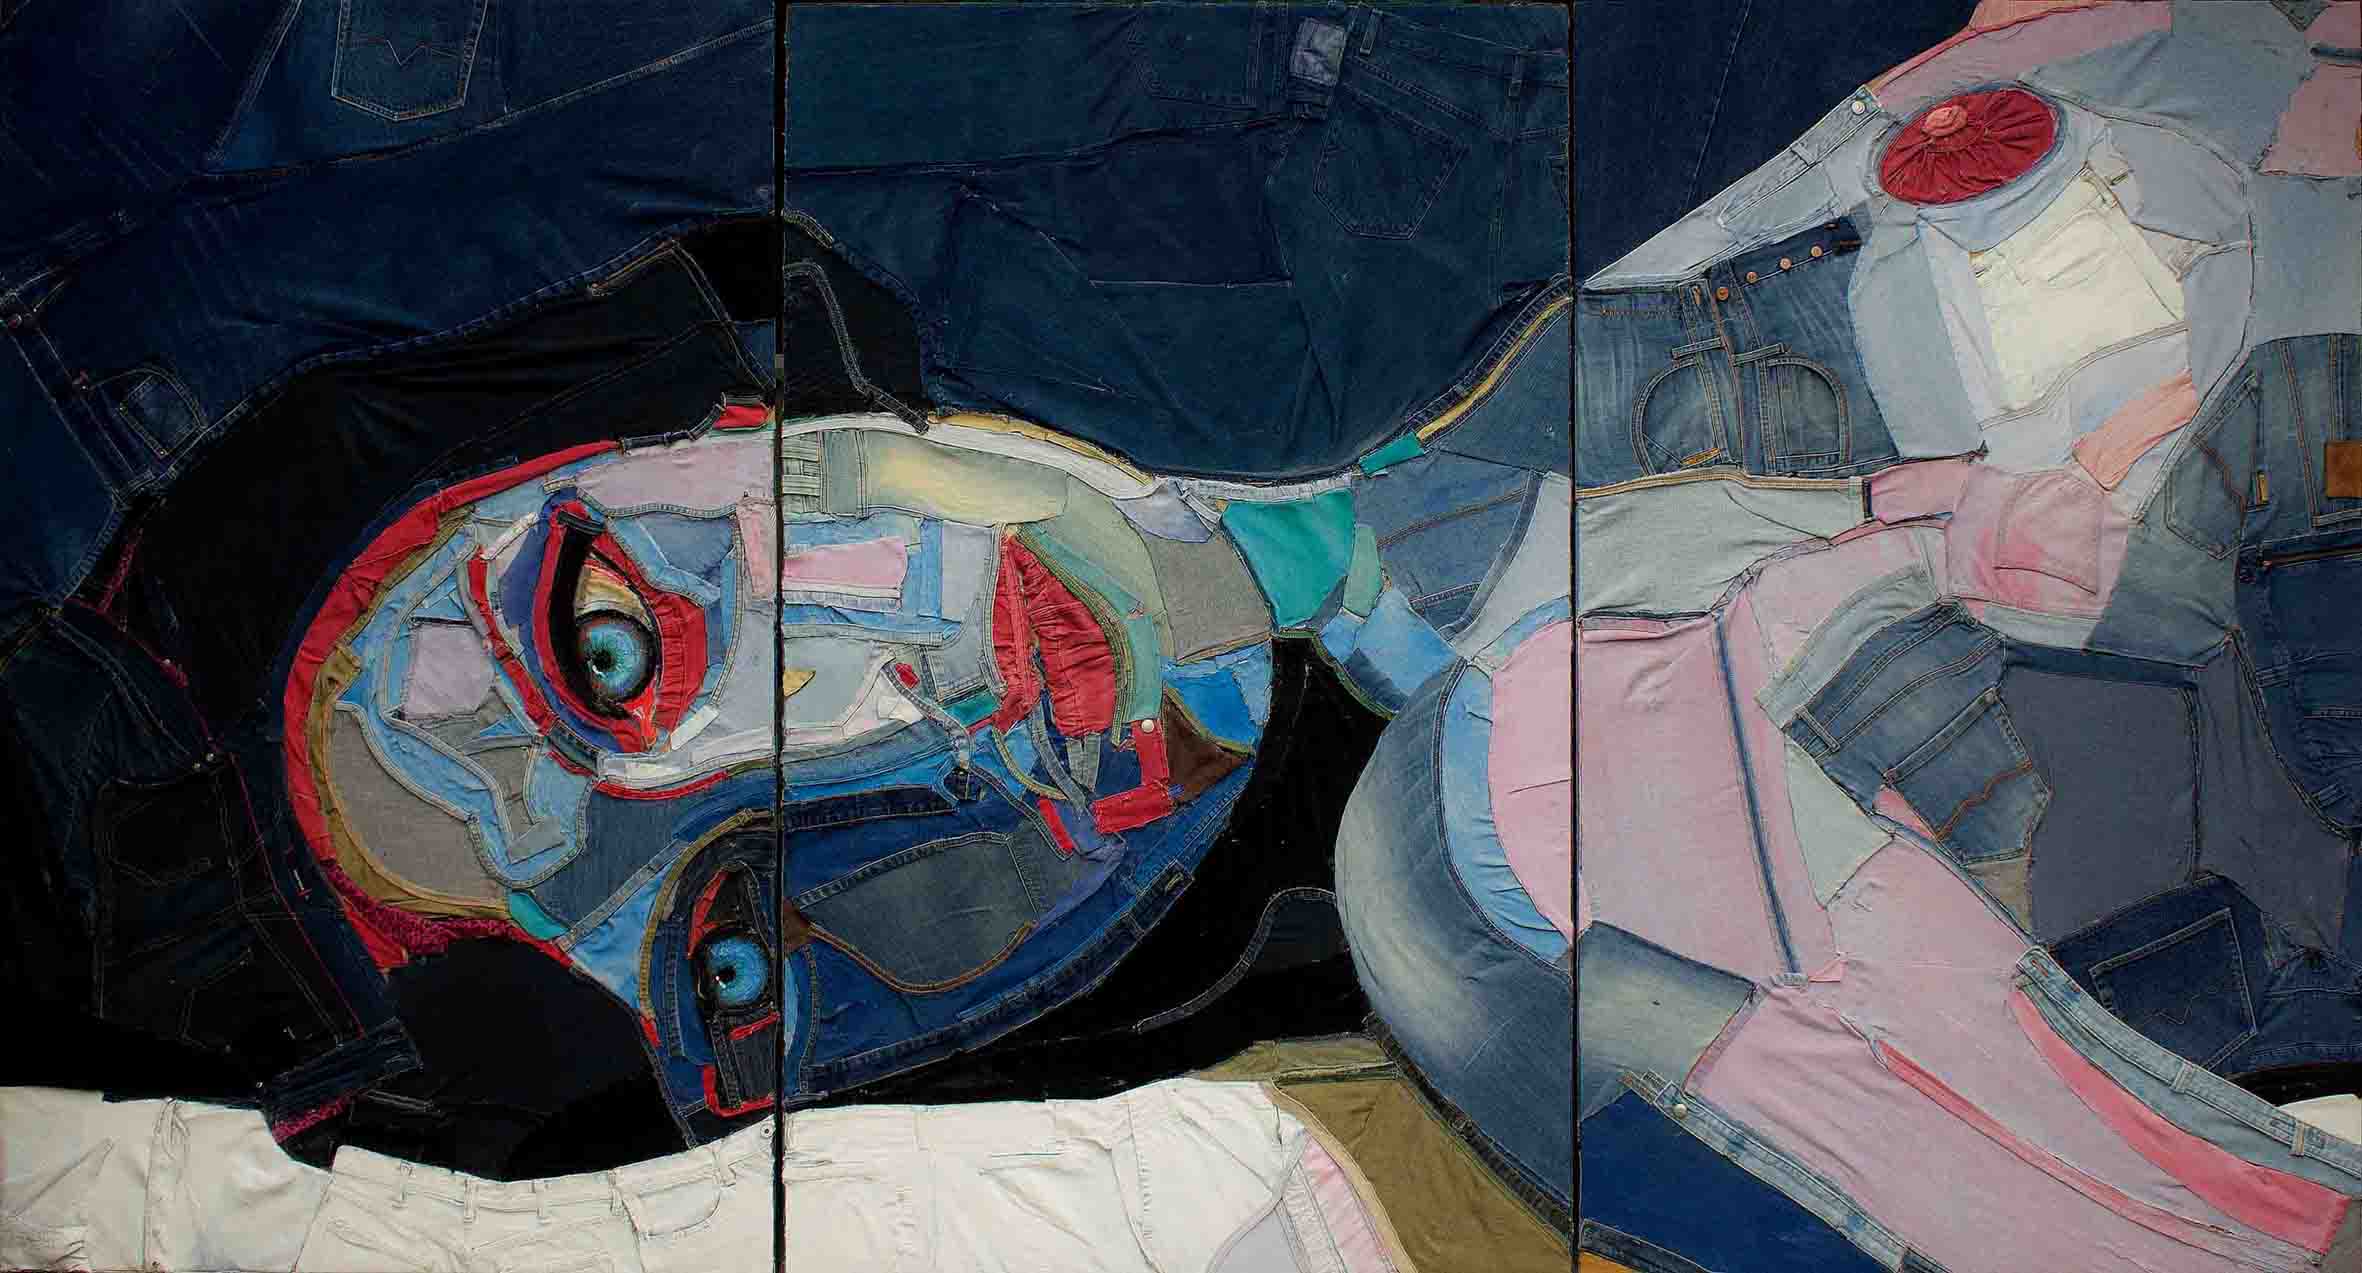 Fabio Modica | Undressed woman - Jeans and acrylic on table - cm 300x170 - 118x71 inches (triptych) - 2013 | Lowe Gallery - USA